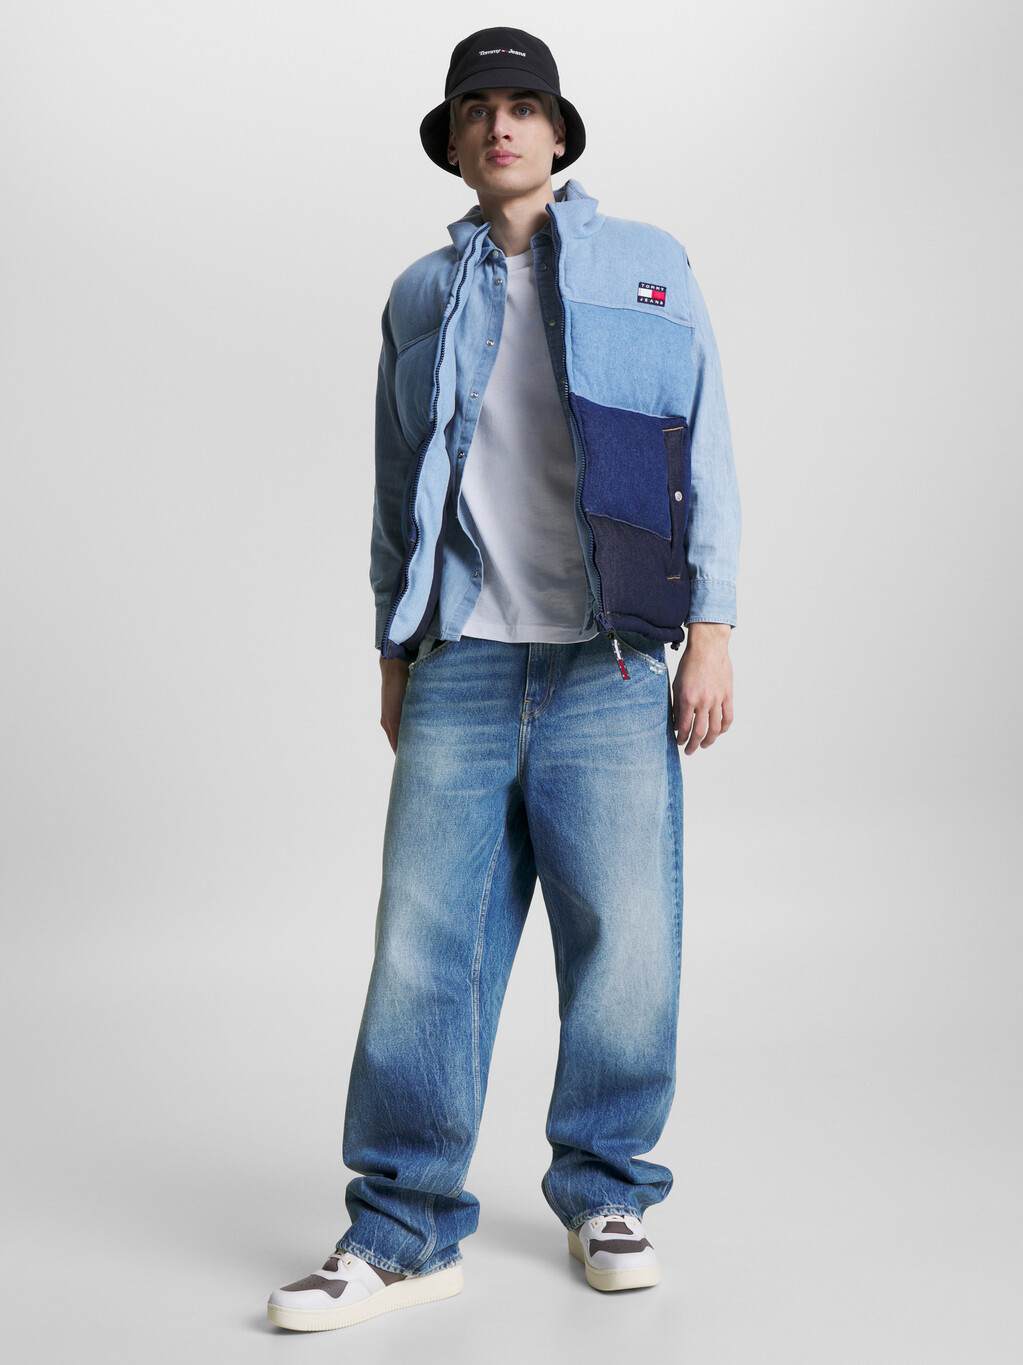 Aiden Archive Baggy Faded Jeans, Denim Light, hi-res